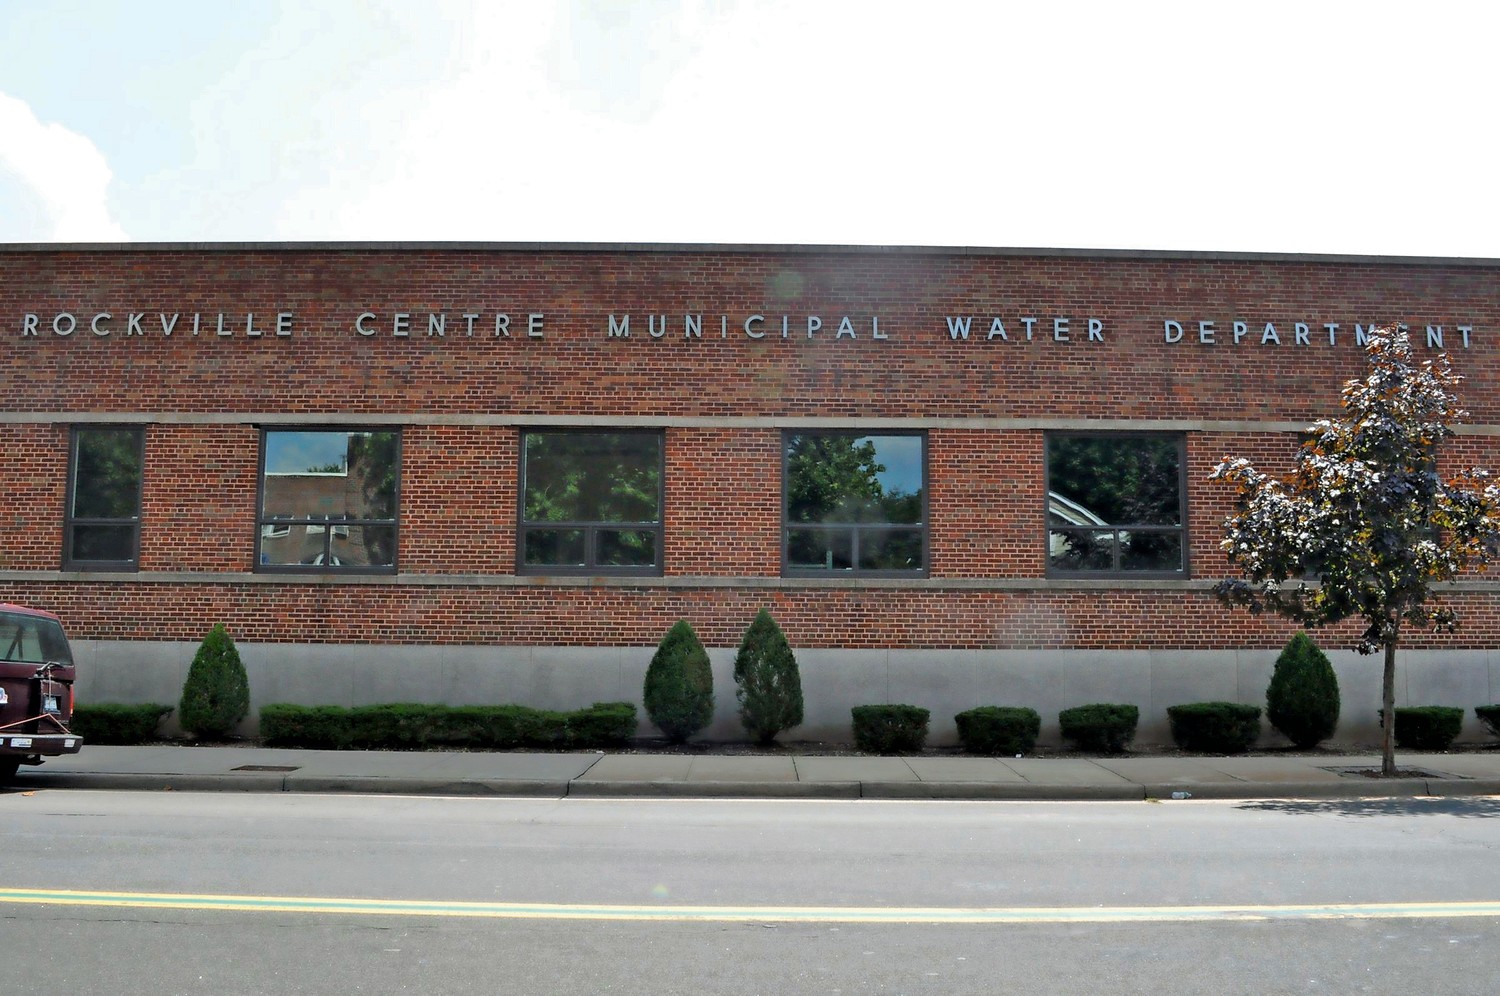 Rockville Centre police expect to move their headquarters to the water department building on Maple Avenue.